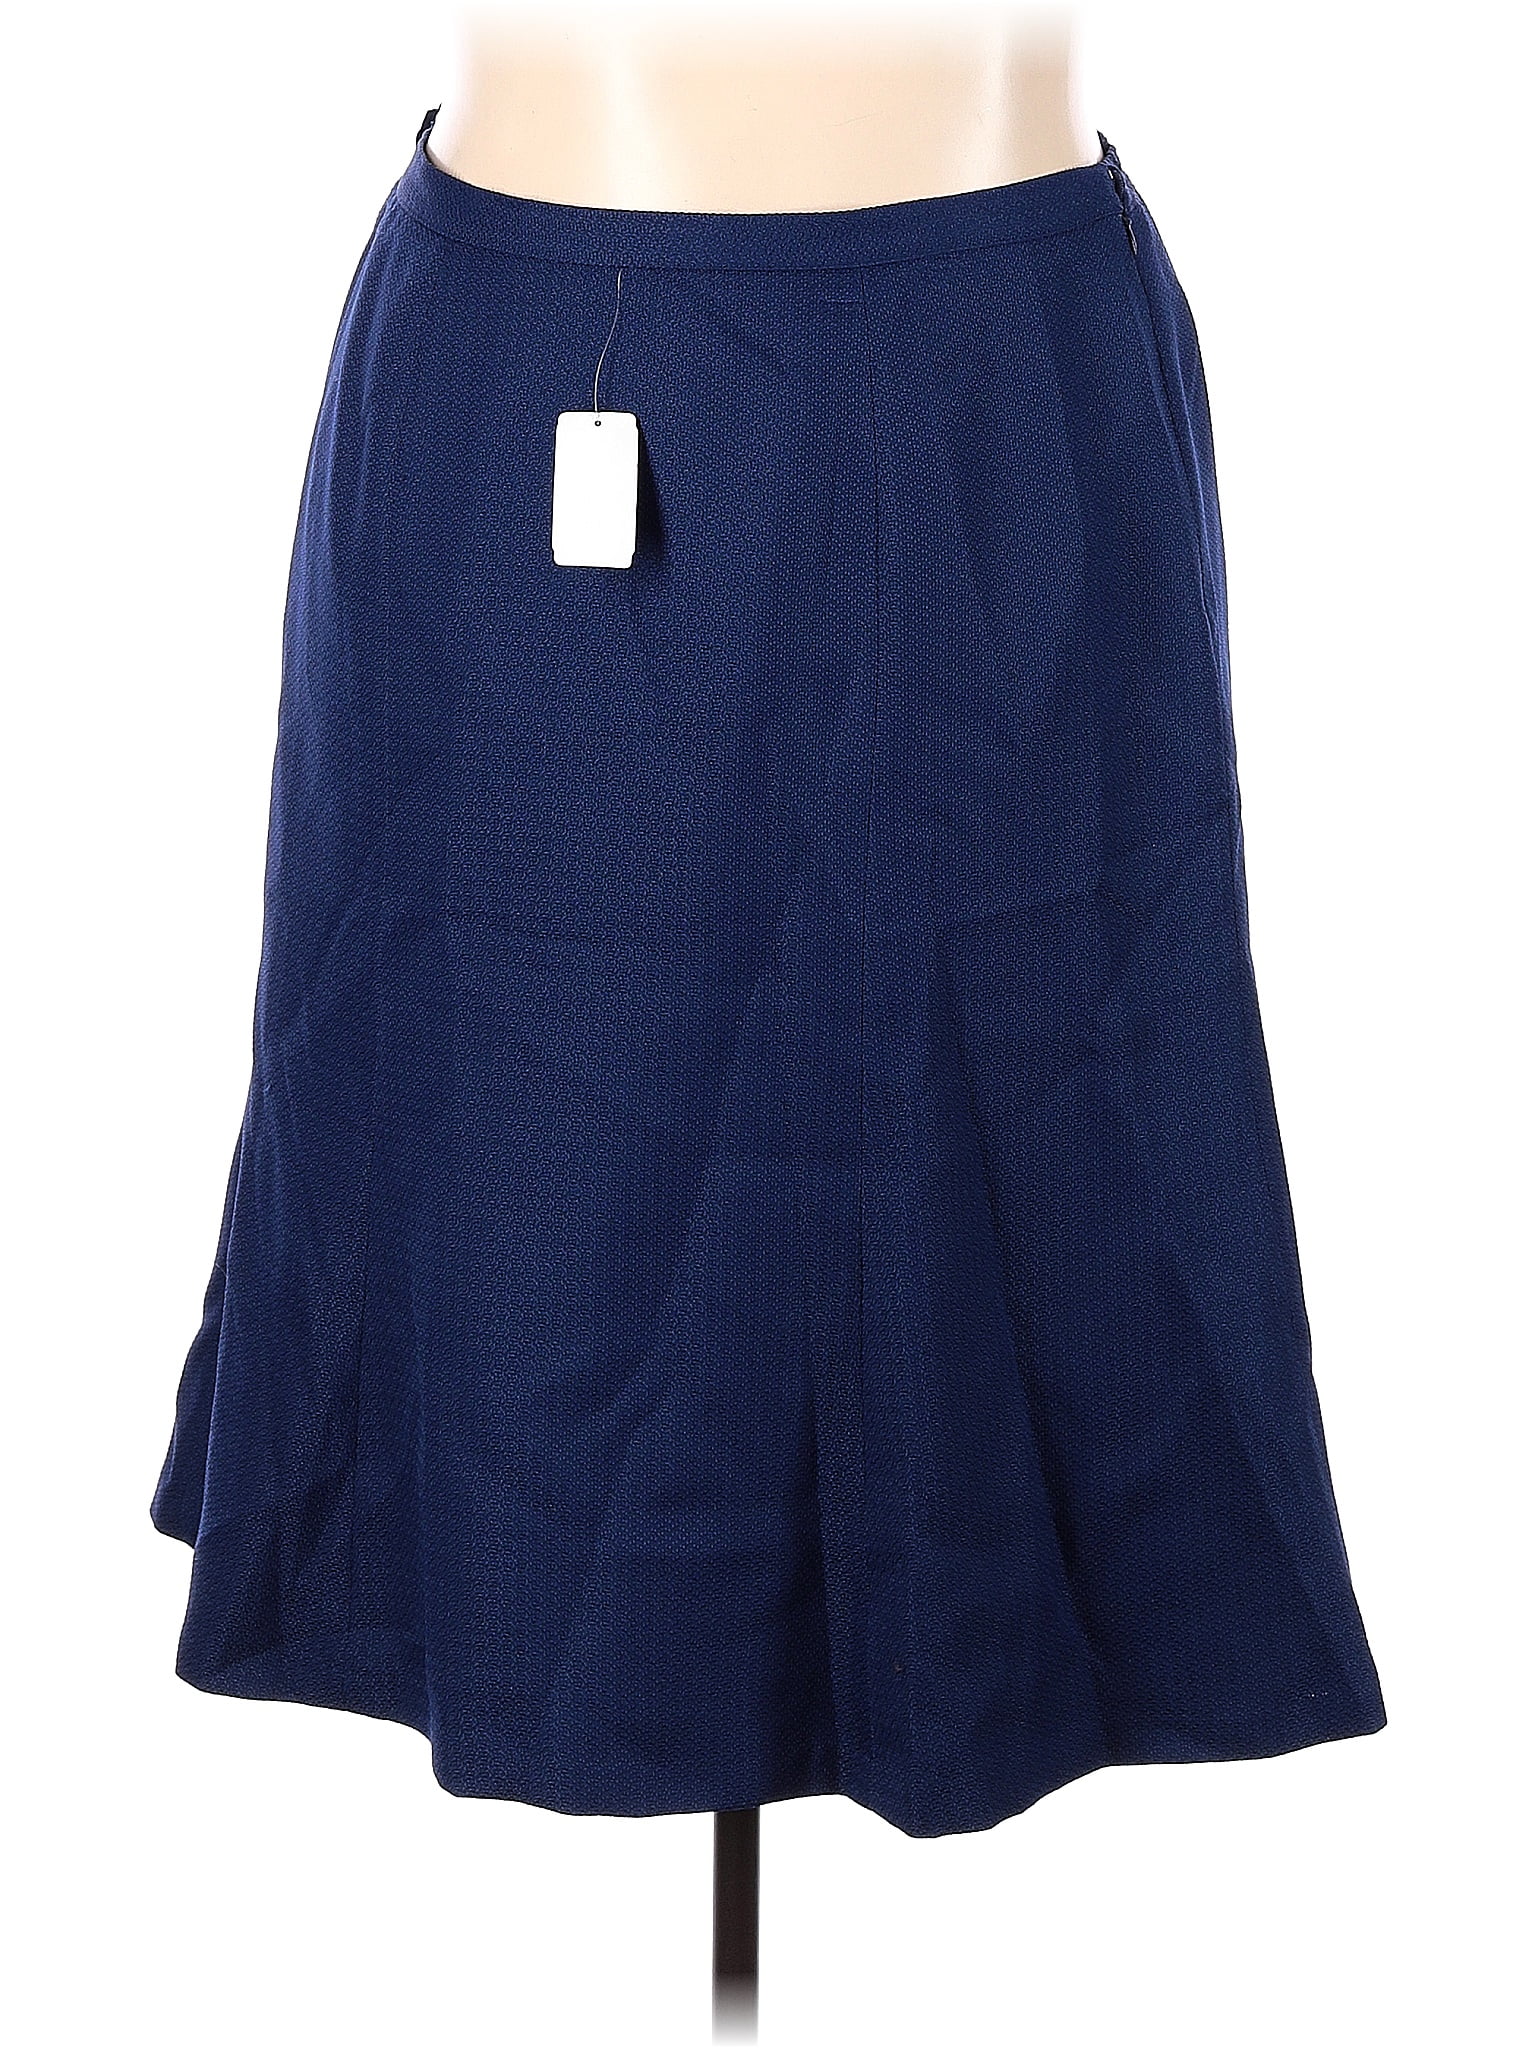 Unbranded 100% Polyester Navy Blue Casual Skirt Size 18 (Plus) - 50% ...